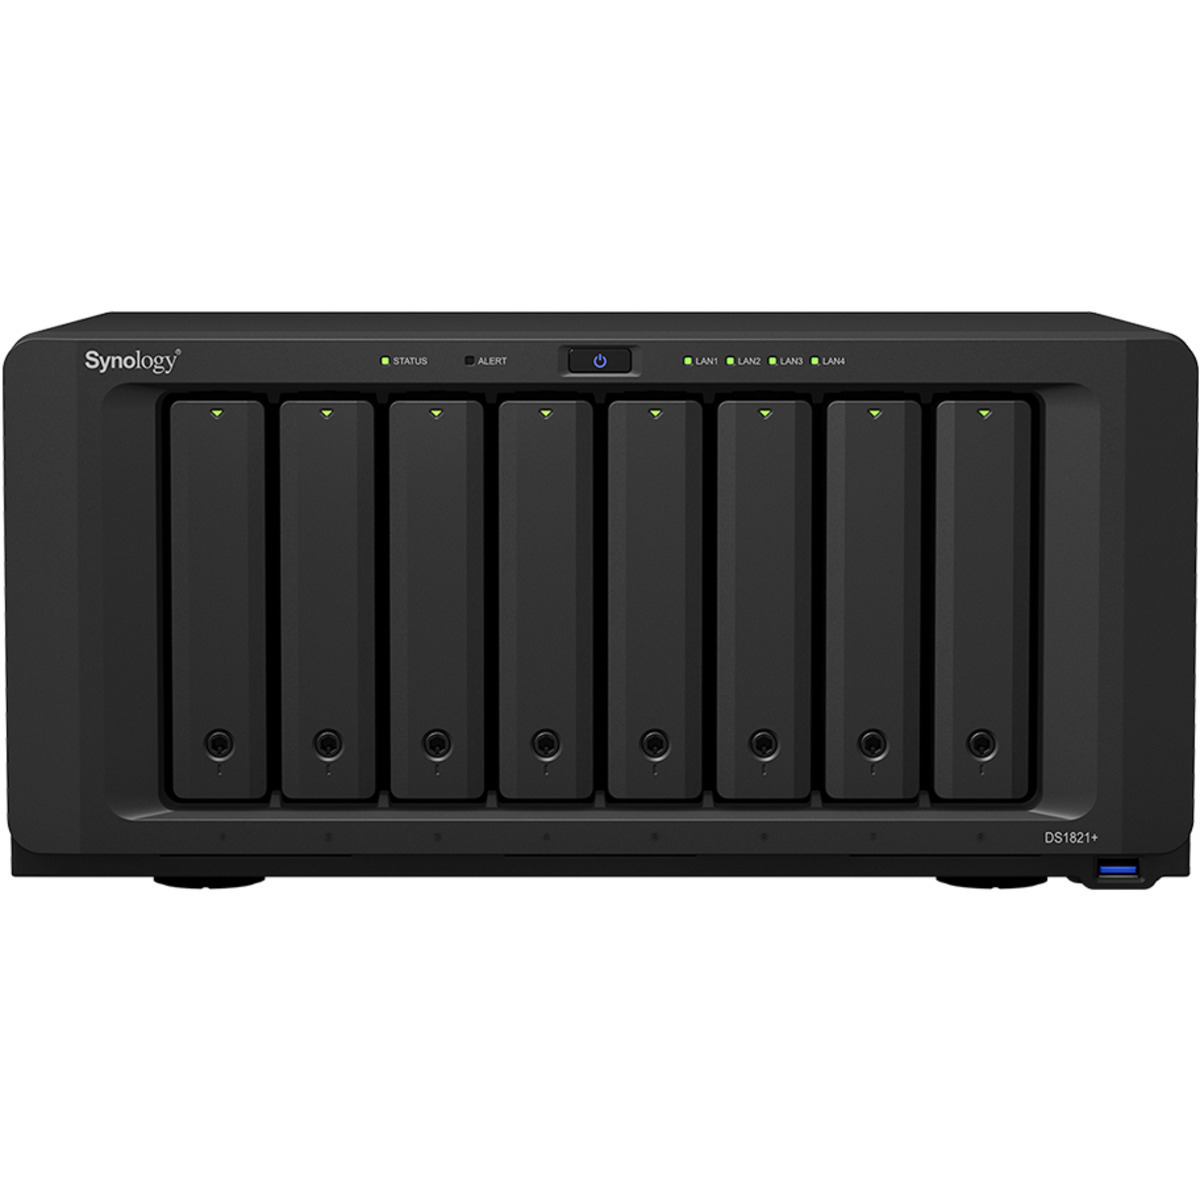 Synology DiskStation DS1821+ 56tb 8-Bay Desktop Multimedia / Power User / Business NAS - Network Attached Storage Device 7x8tb Seagate IronWolf Pro ST8000NT001 3.5 7200rpm SATA 6Gb/s HDD NAS Class Drives Installed - Burn-In Tested - ON SALE - FREE RAM UPGRADE DiskStation DS1821+